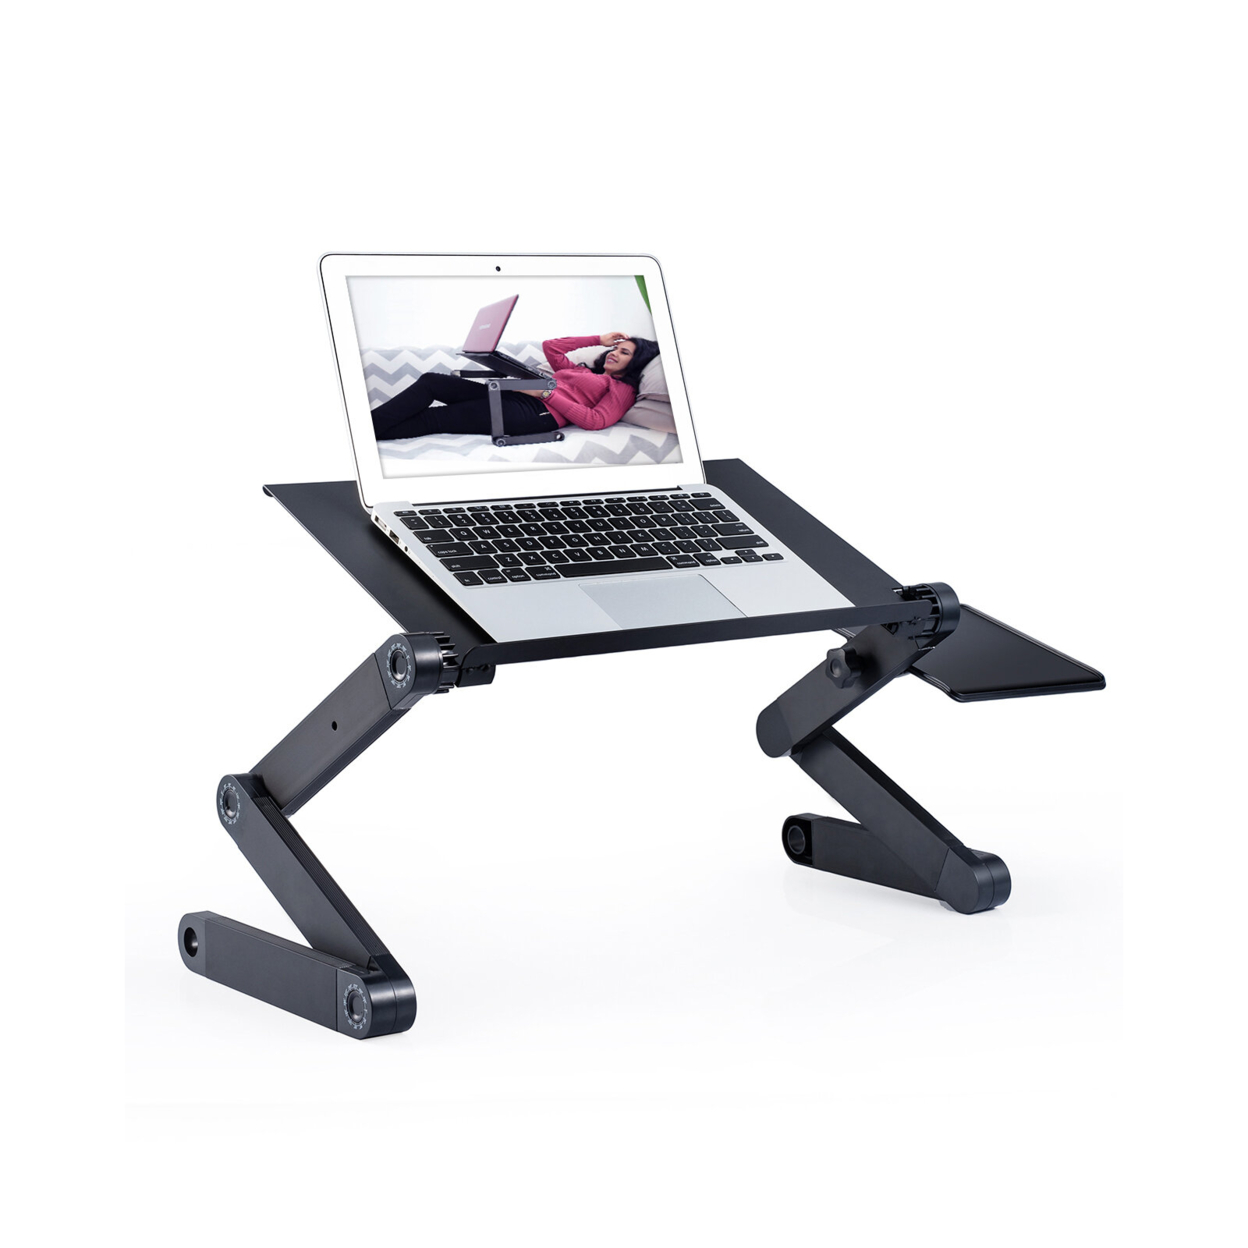 Rainbean Black Adjustable and Foldable Portable Laptop Stand with Mouse Pad and 2 CPU Cooling USB Fans